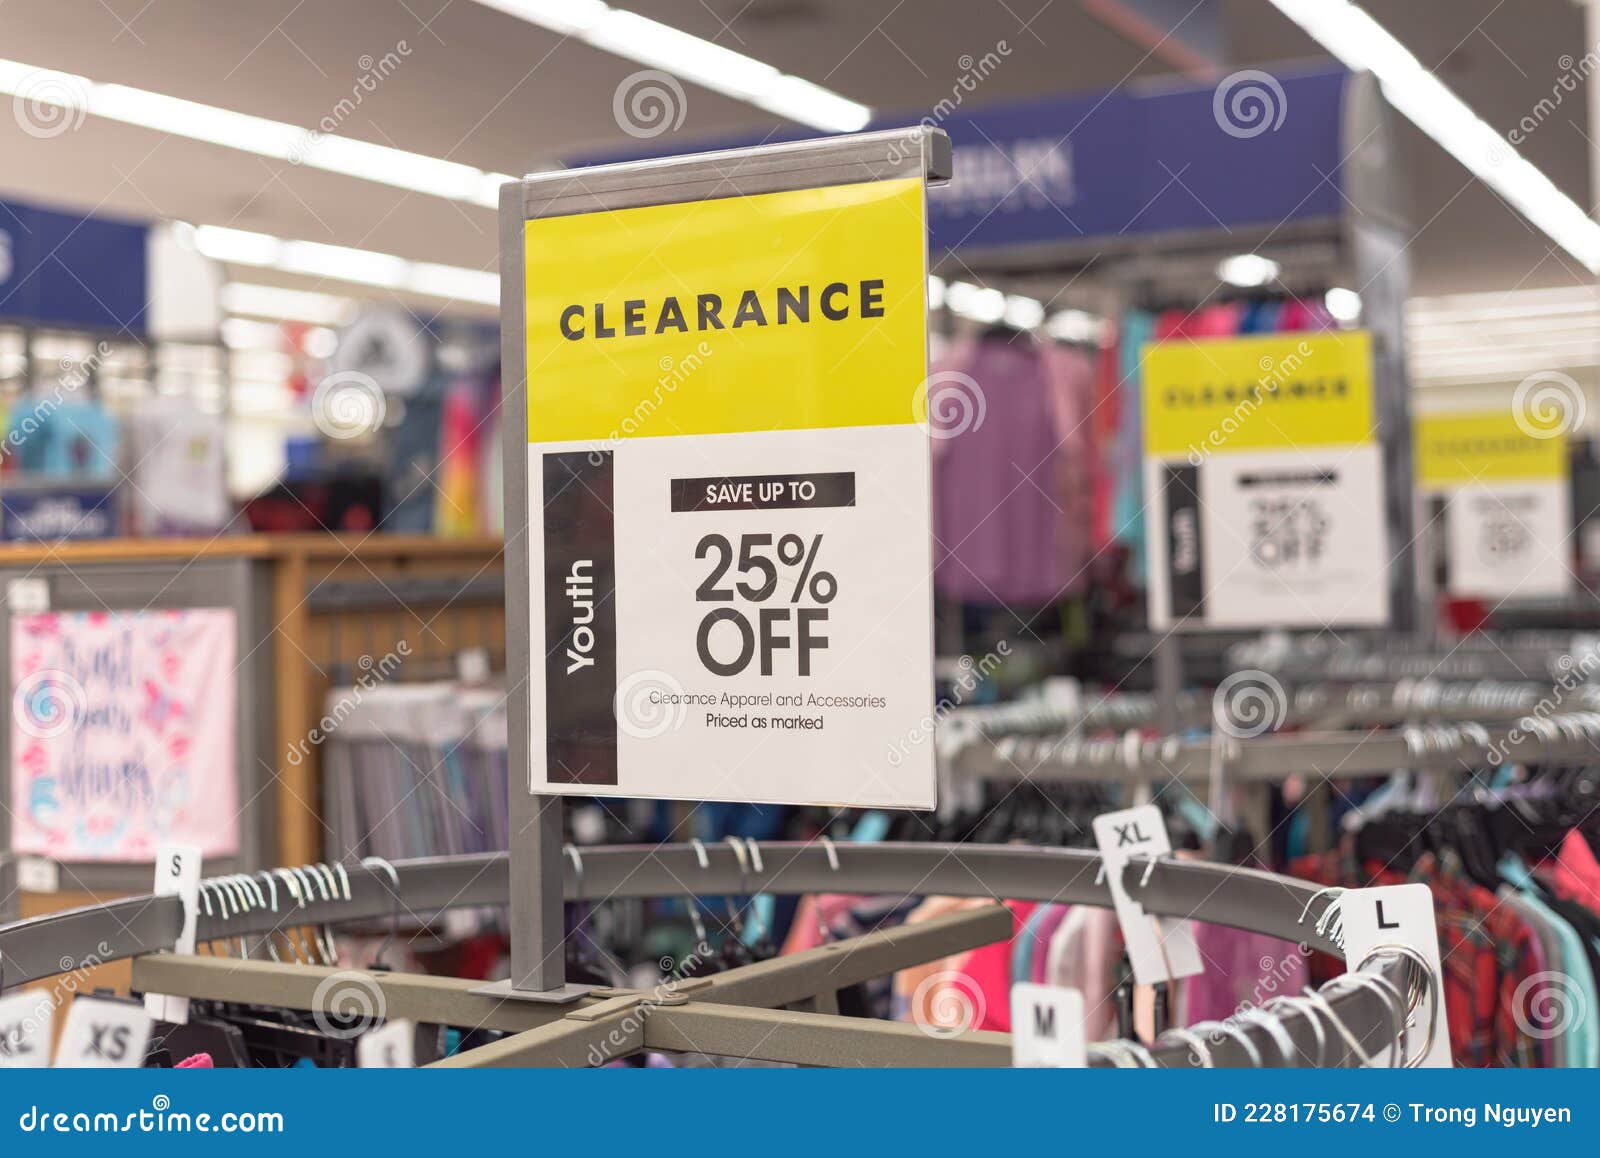 25 Percent Off Clearance Sign on a Round Clothing Rack at Fashion Store in  America Stock Photo - Image of brand, clothing: 228175674